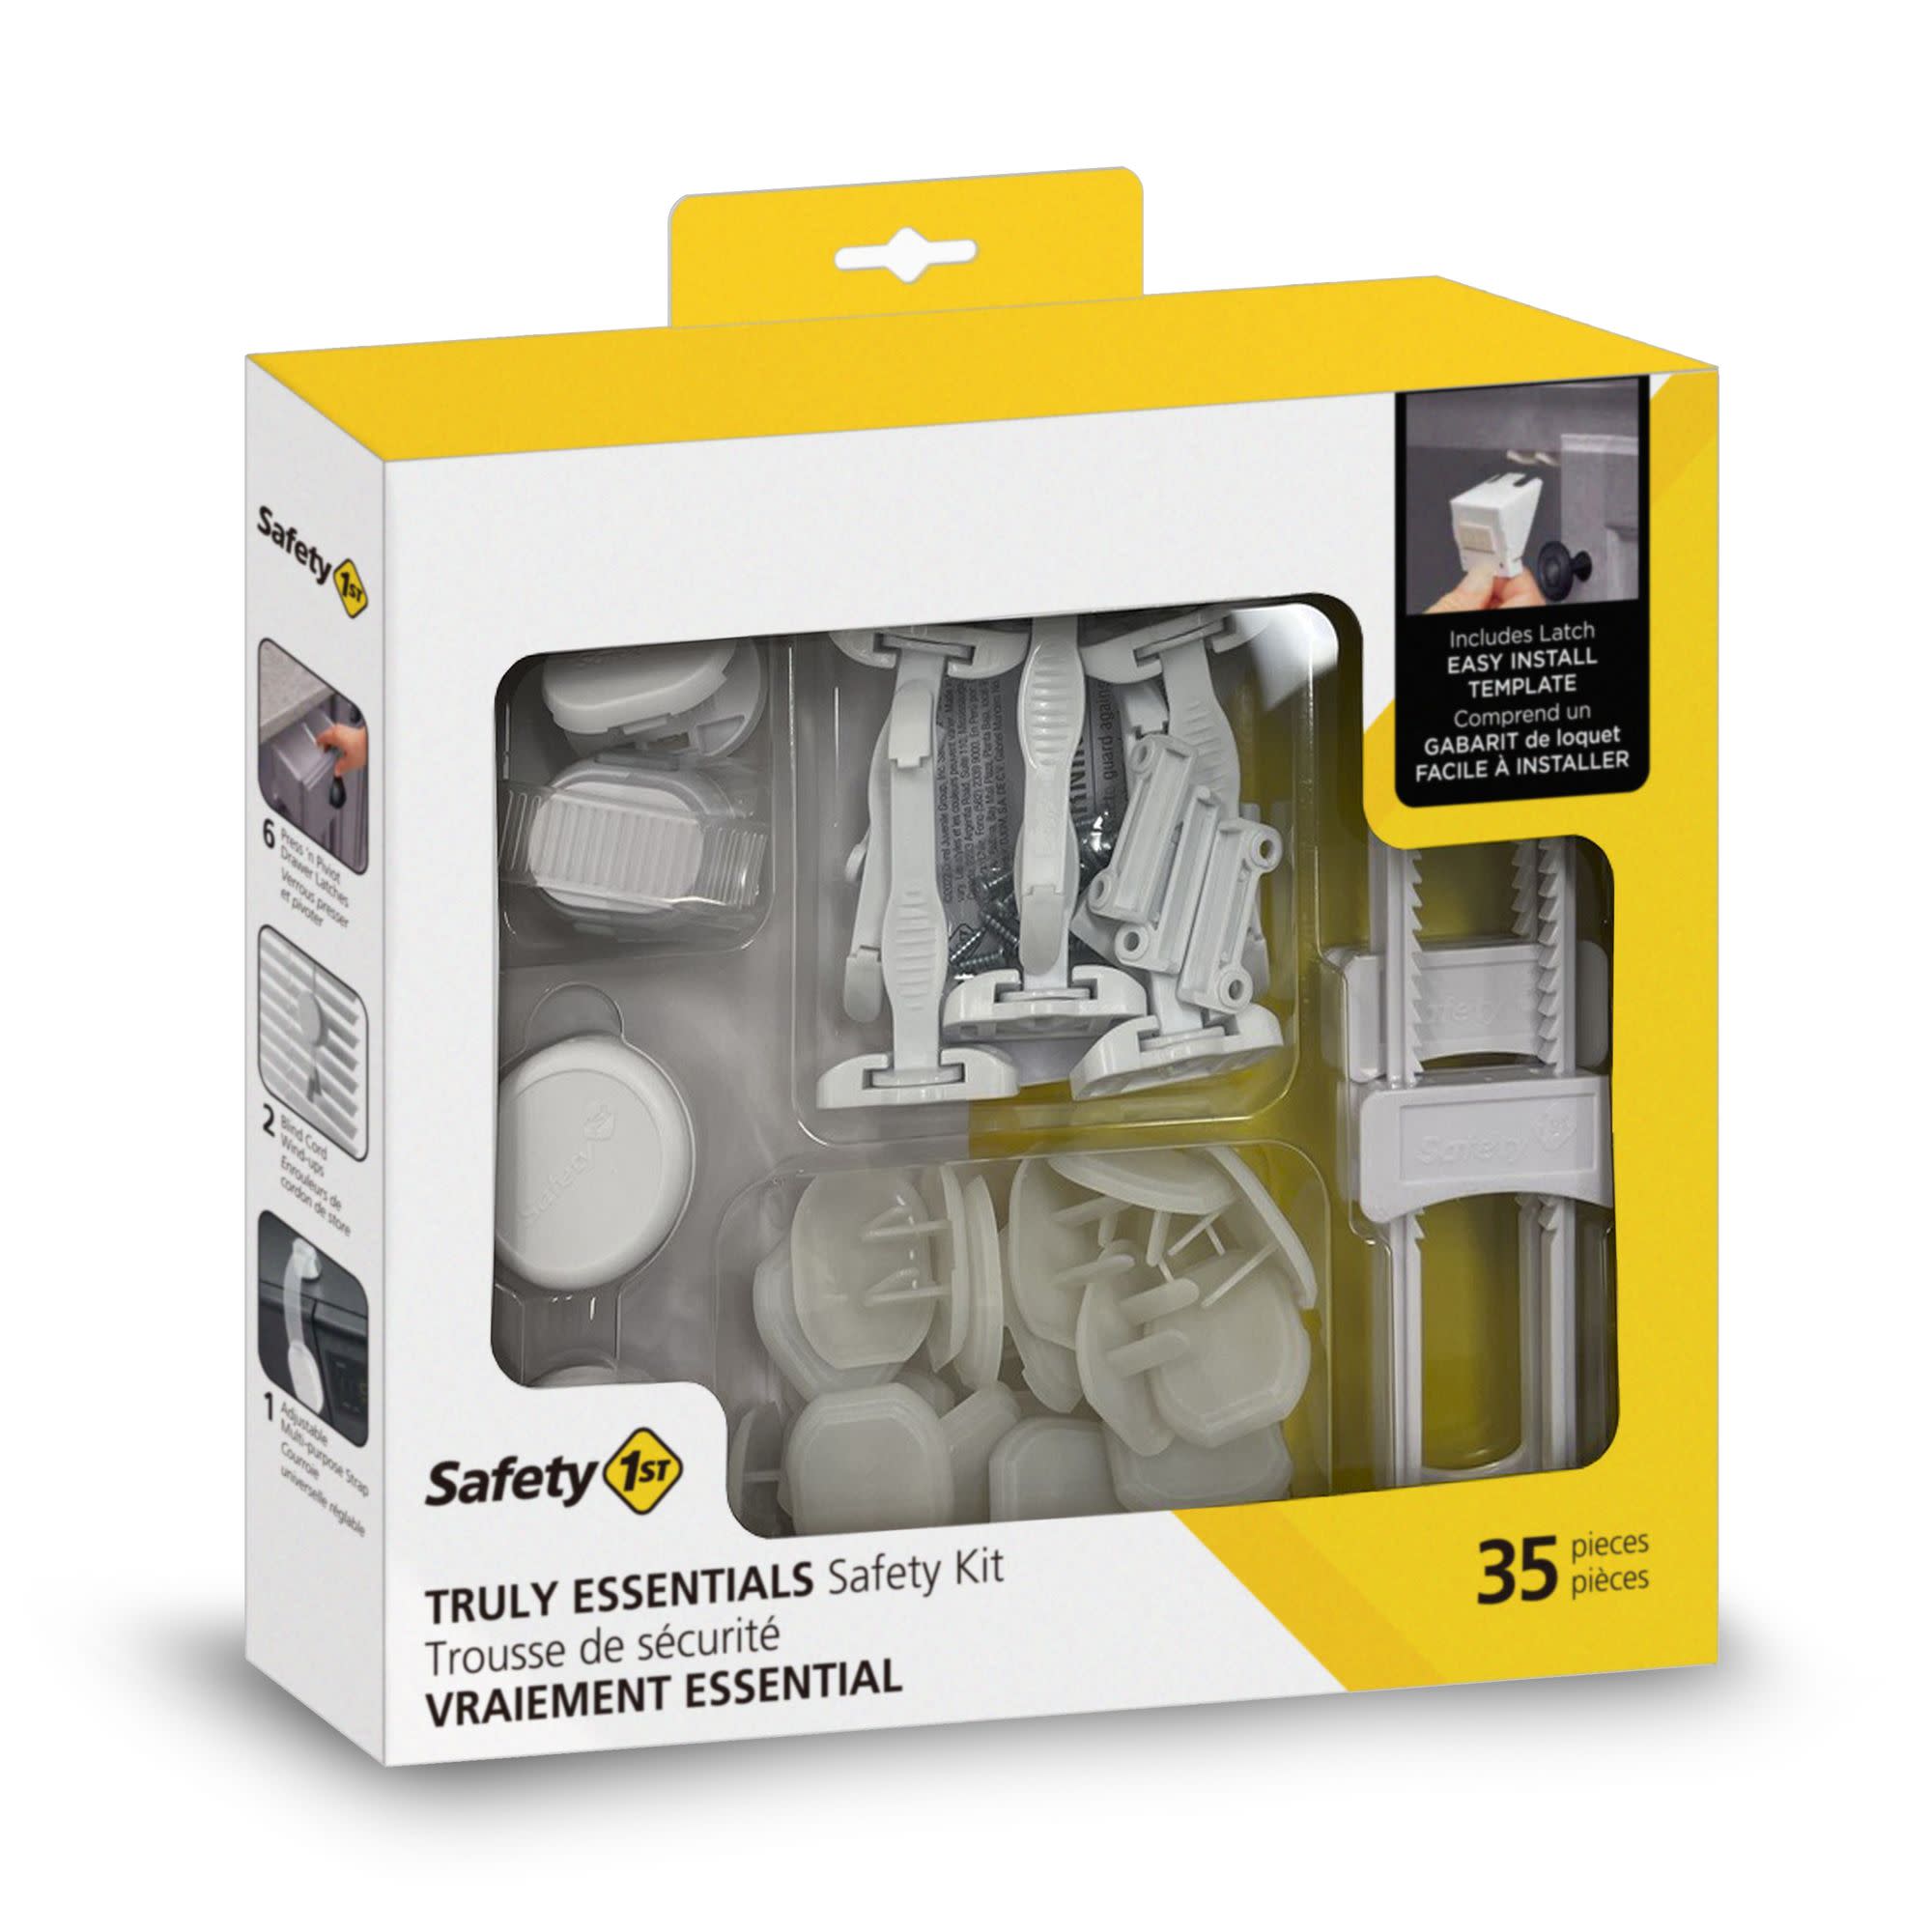 Truly Essentials Safety Kit - White